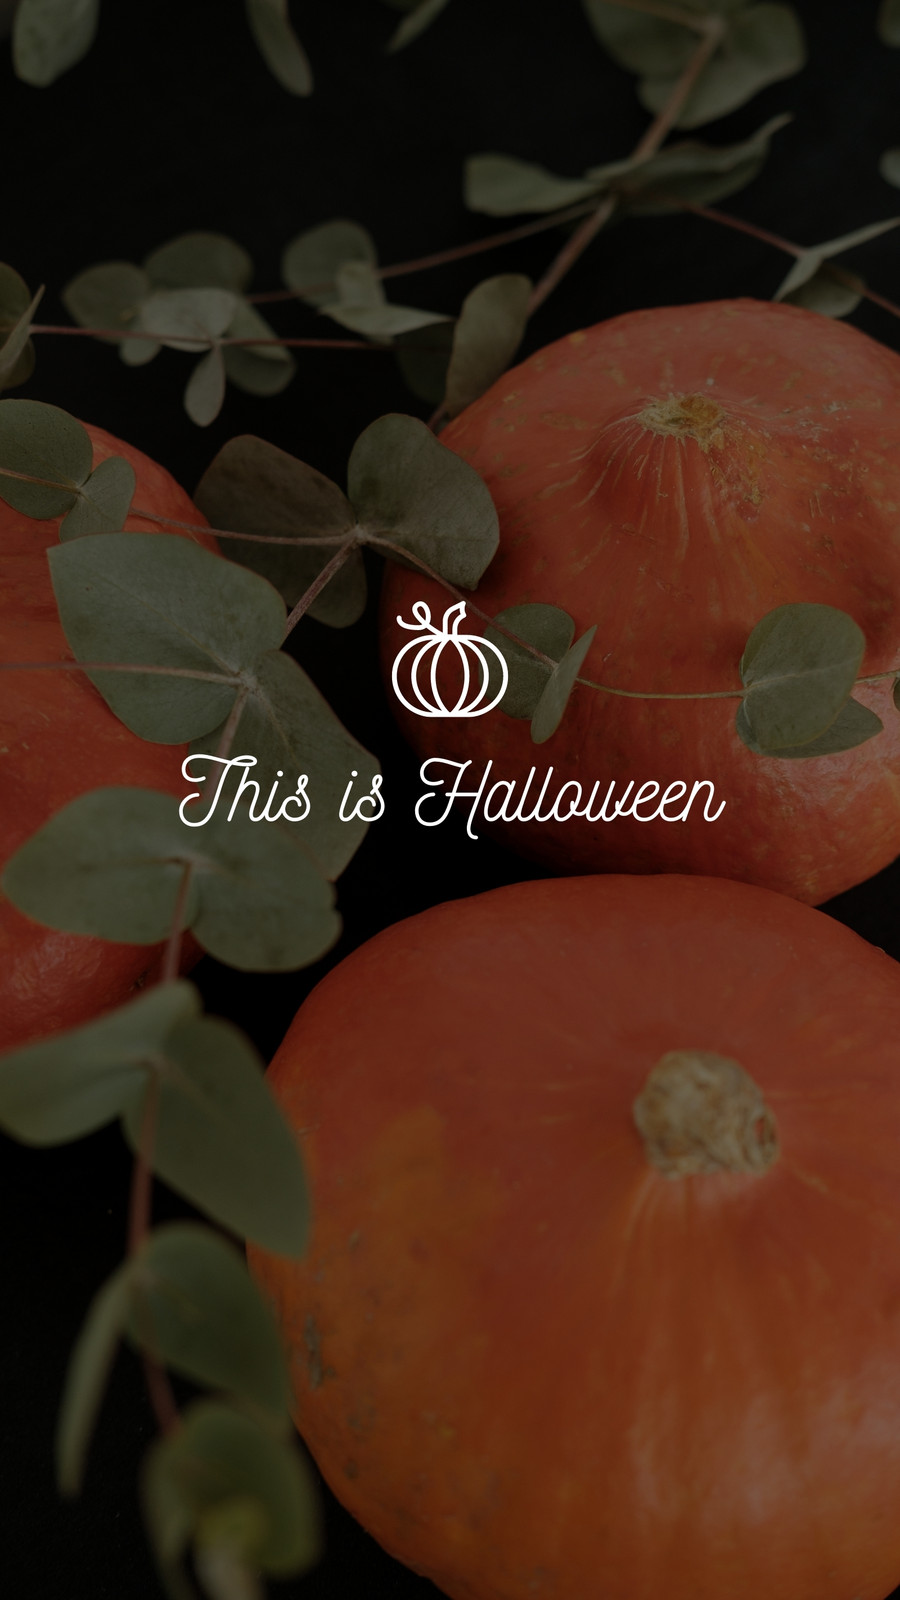 Page 10 - Free and customizable pumpkin templates